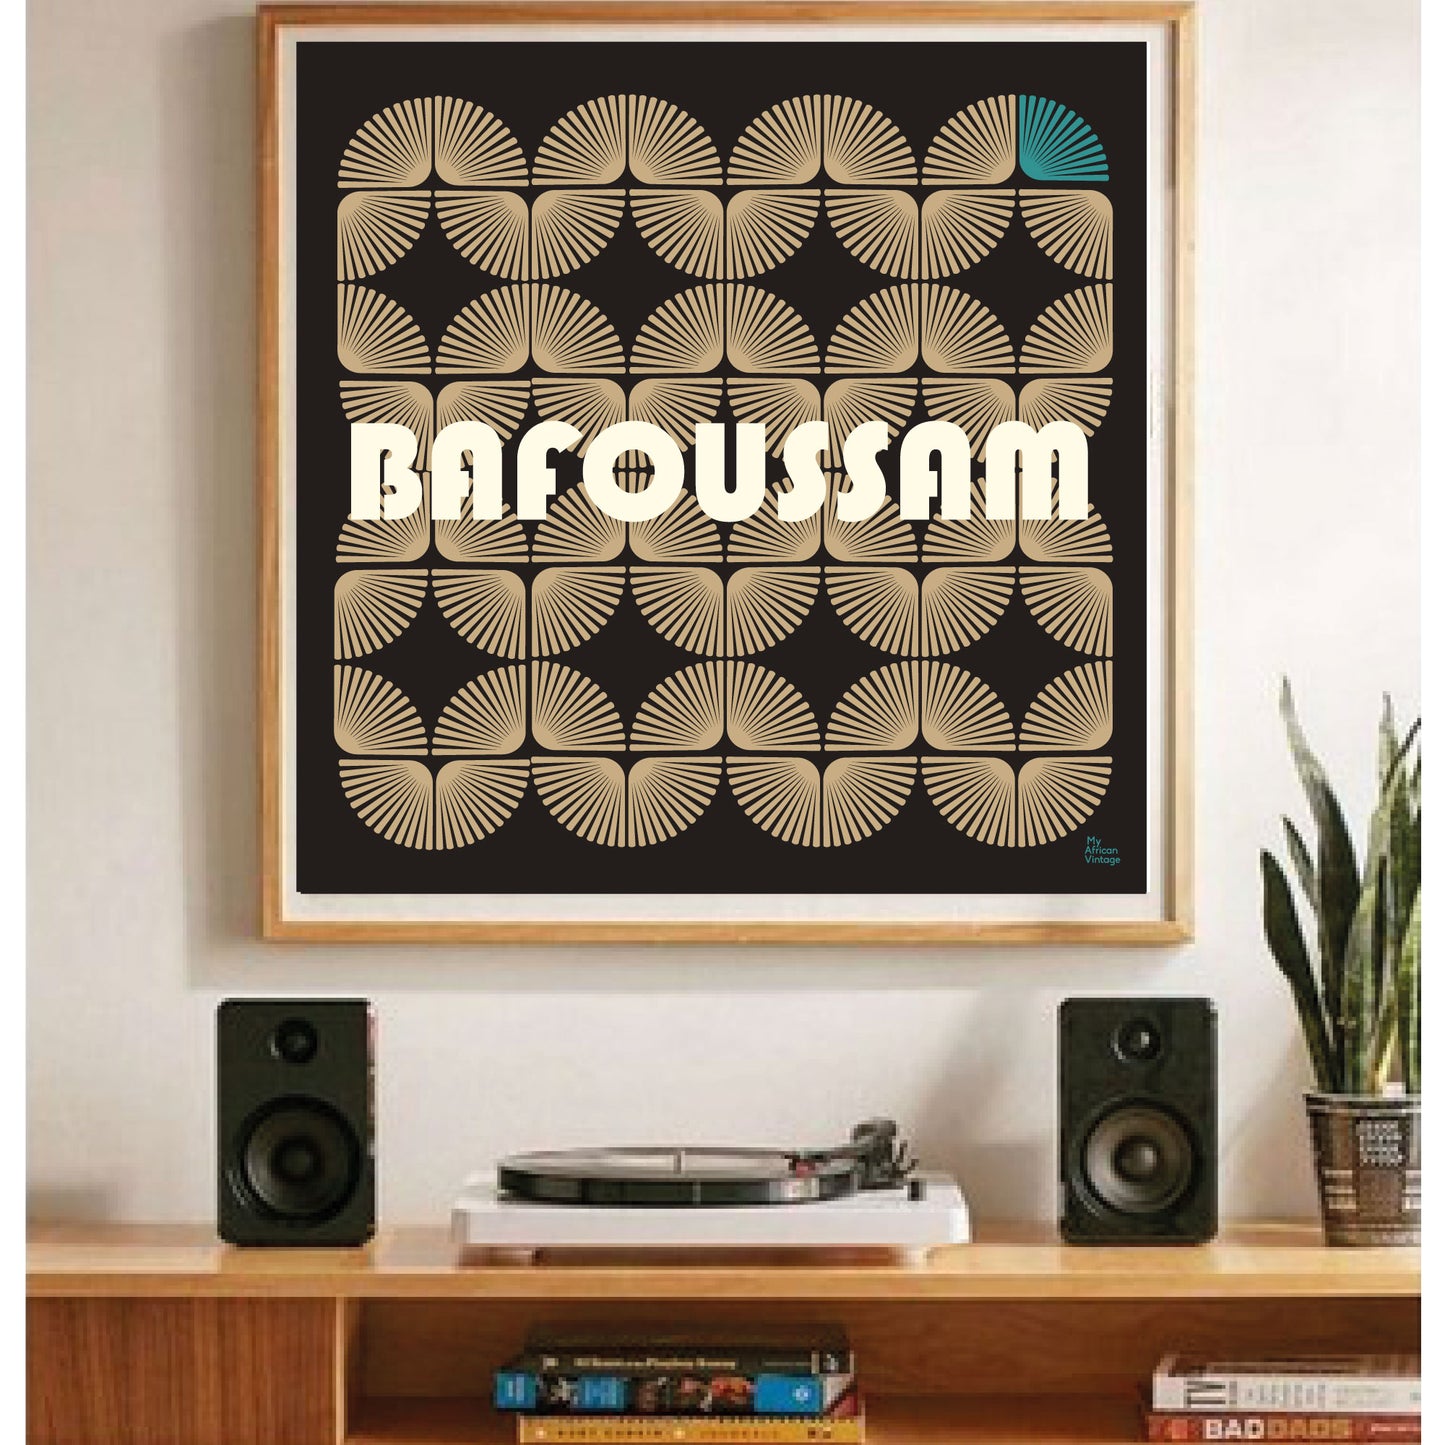 "Bafoussam" retro style poster - "My African Vintage" collection 